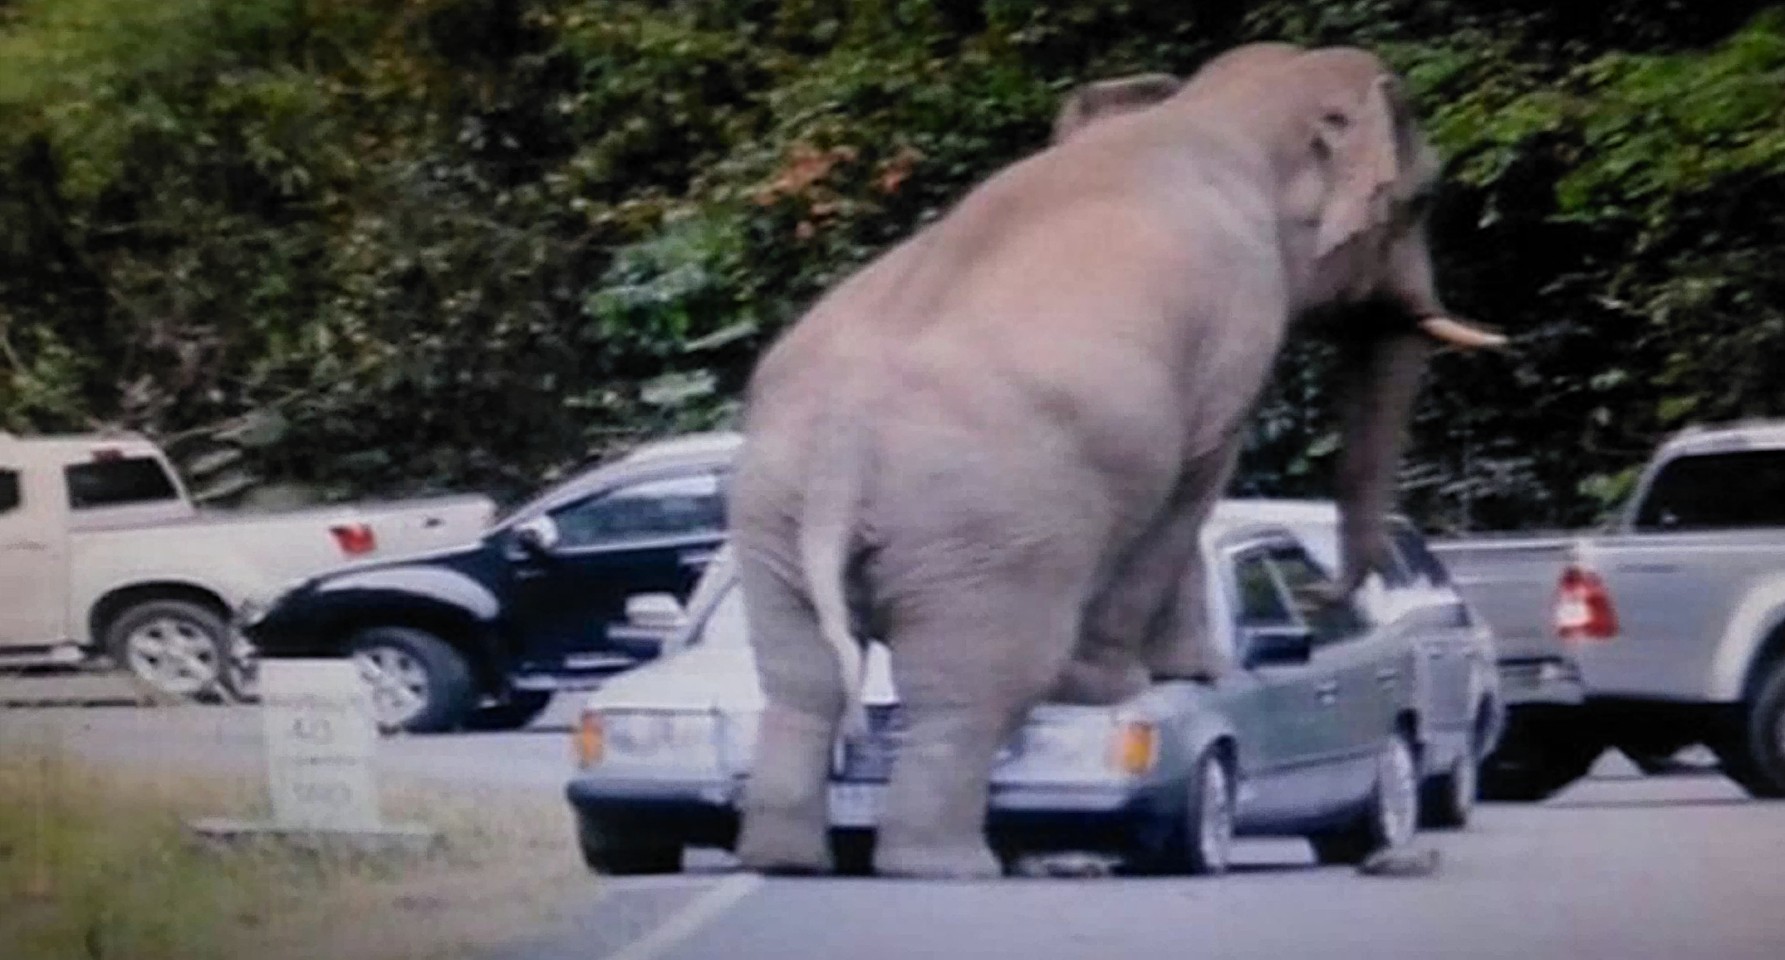 An elephant crushed a car in Thailand at the weekend